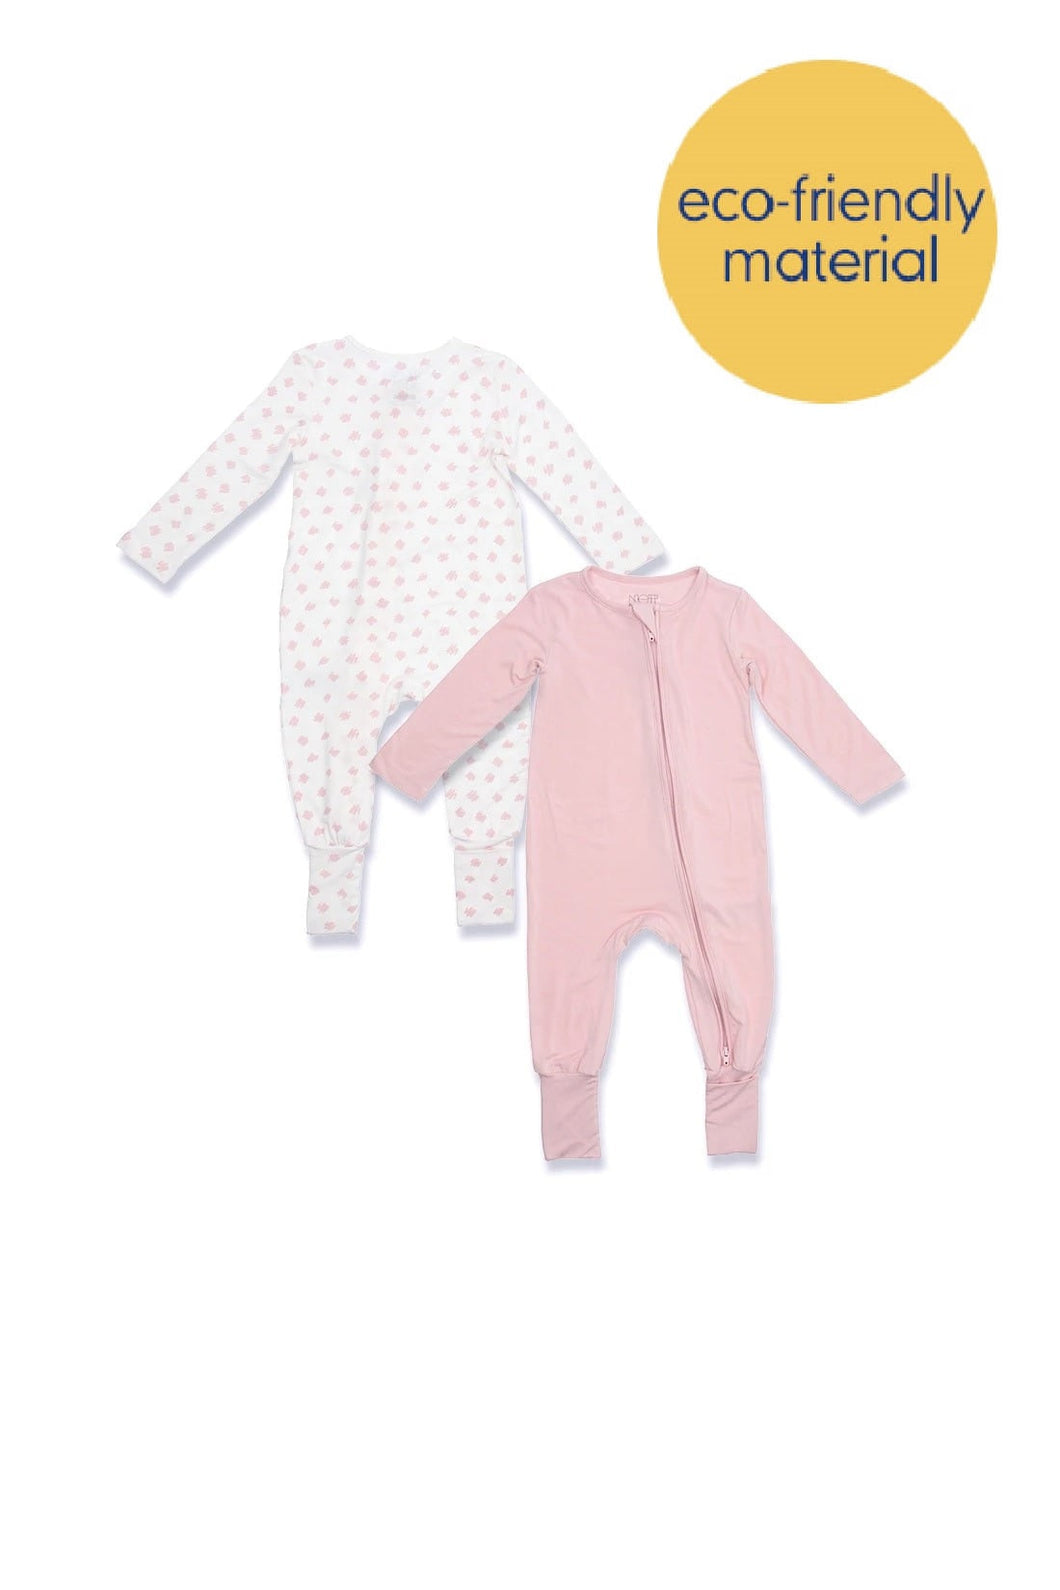 Not Too Big Pink Bamboo Sleepsuits - 2 Pack